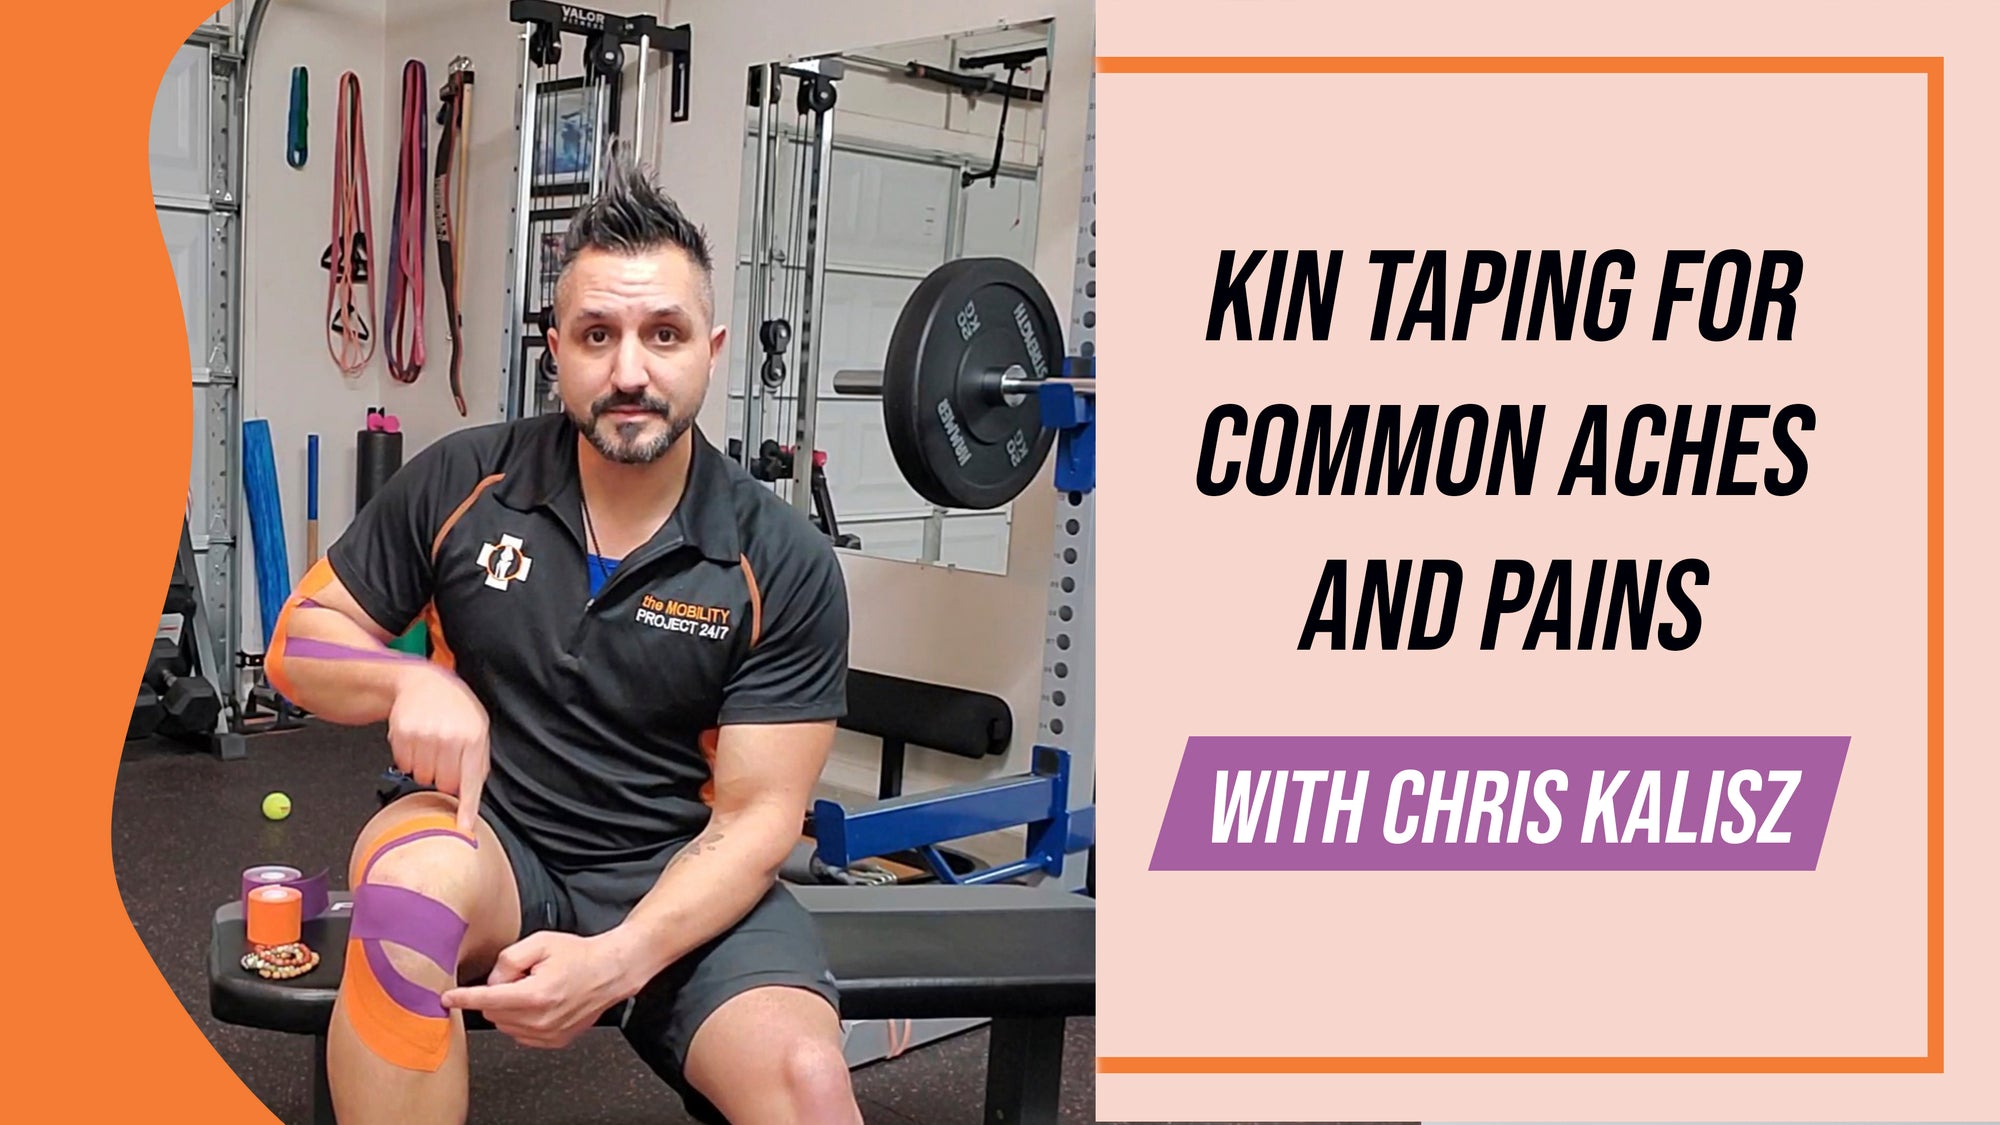 KINESIOLOGY TAPING FOR COMMON INJURIES WITH CHRIS KALISZ